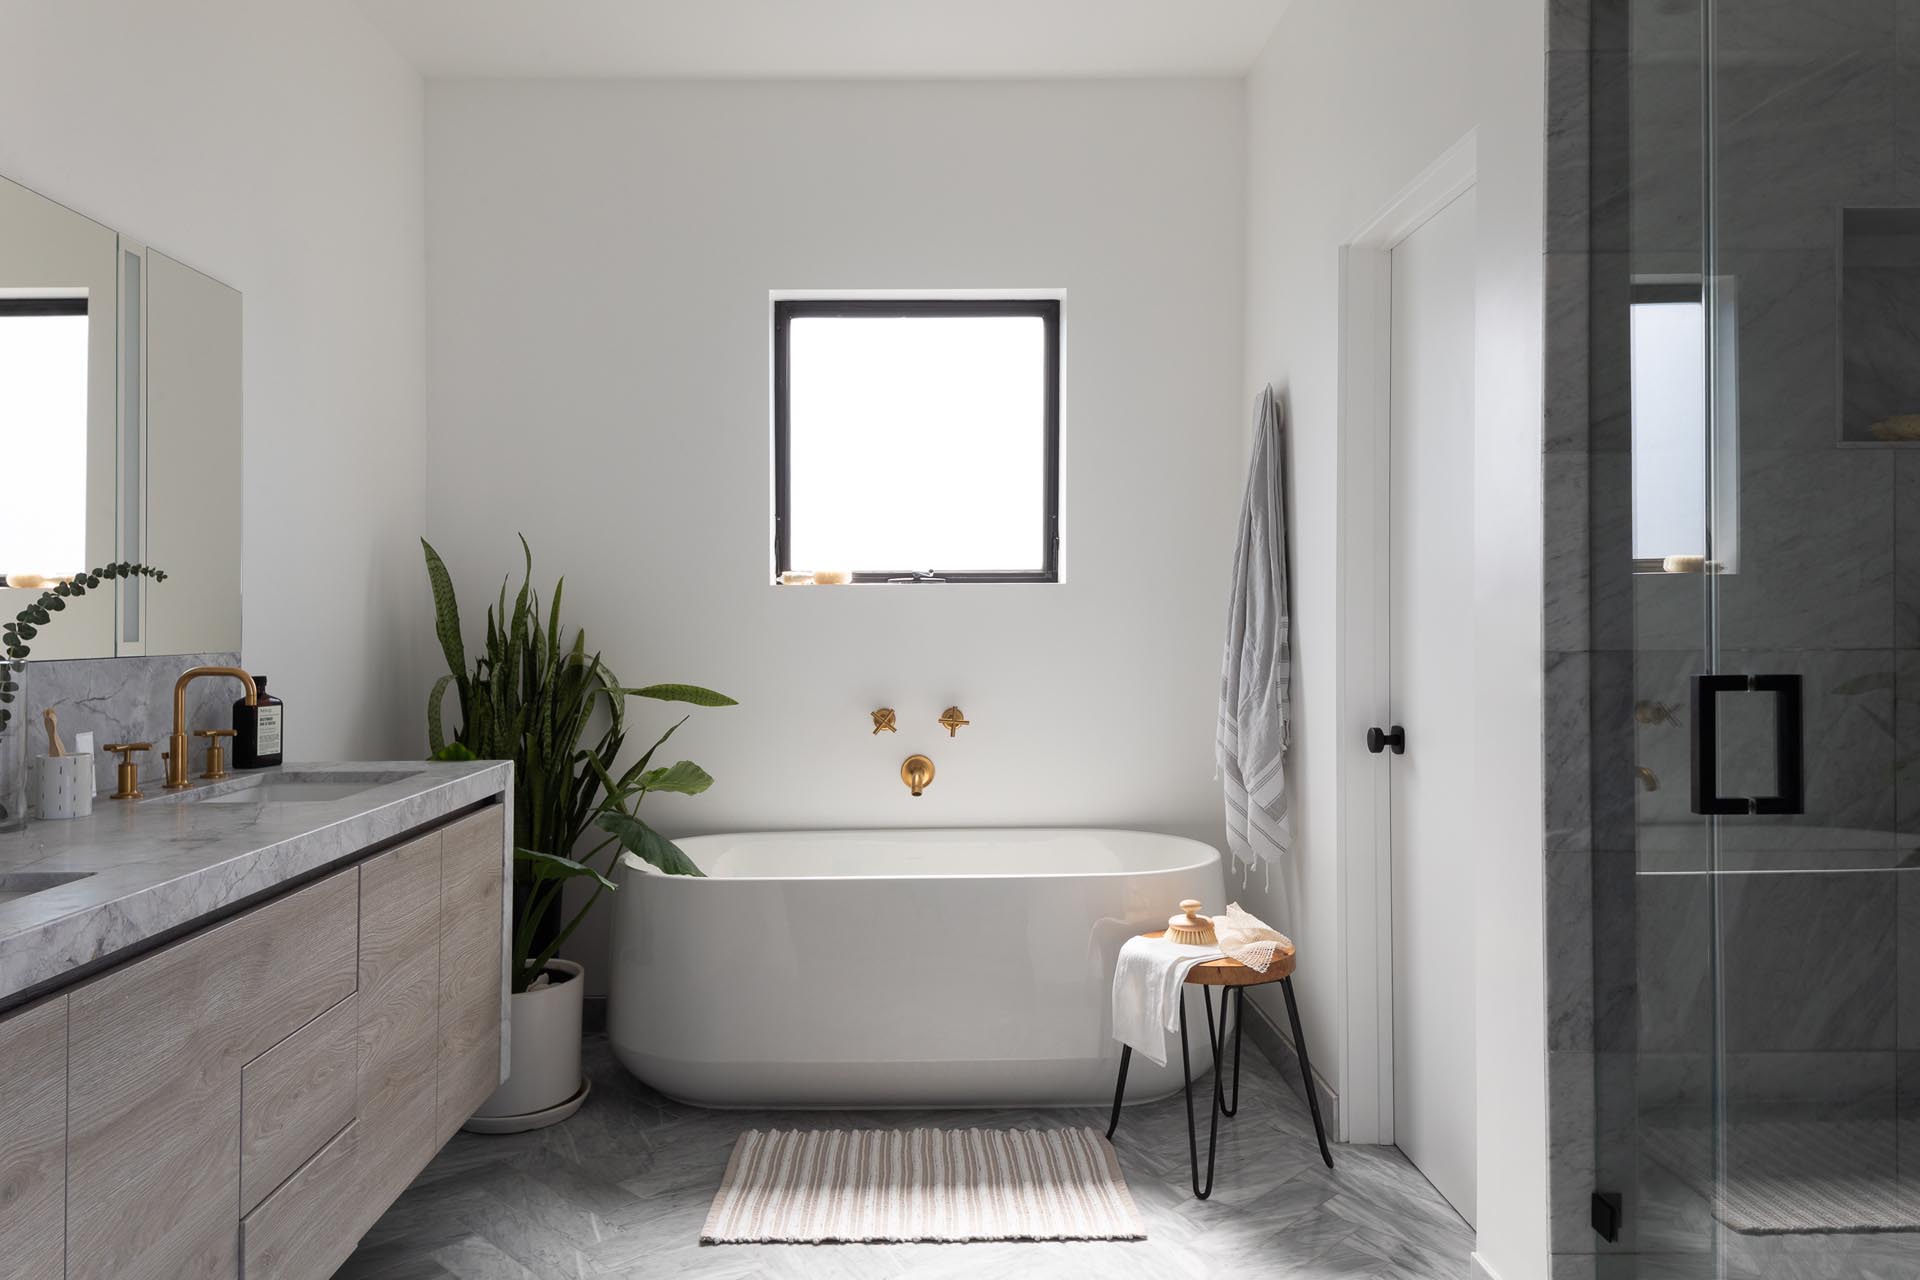 In this modern en-suite bathroom, there's a freestanding white bathtub, a walk-in shower, and a wood vanity with a waterfall countertop.